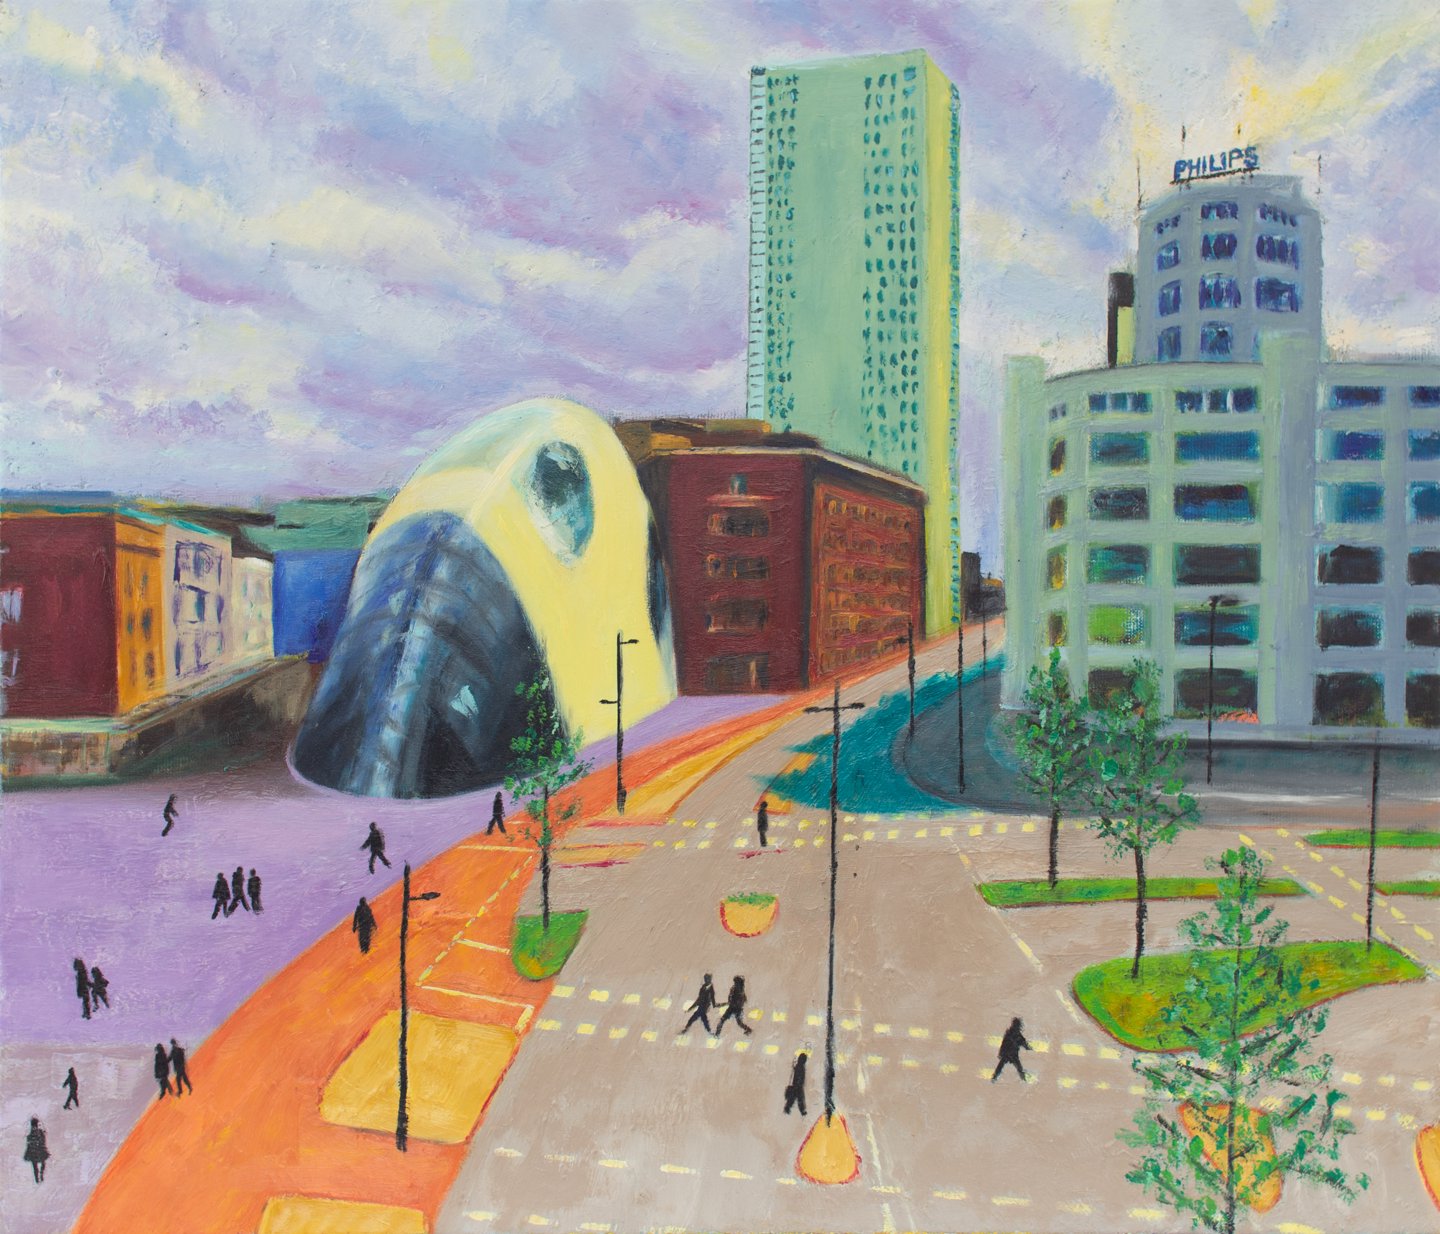 Exceptionally colorful and impressionistic painting of the streets around the Lichttoren in Eindhoven, Netherlands.